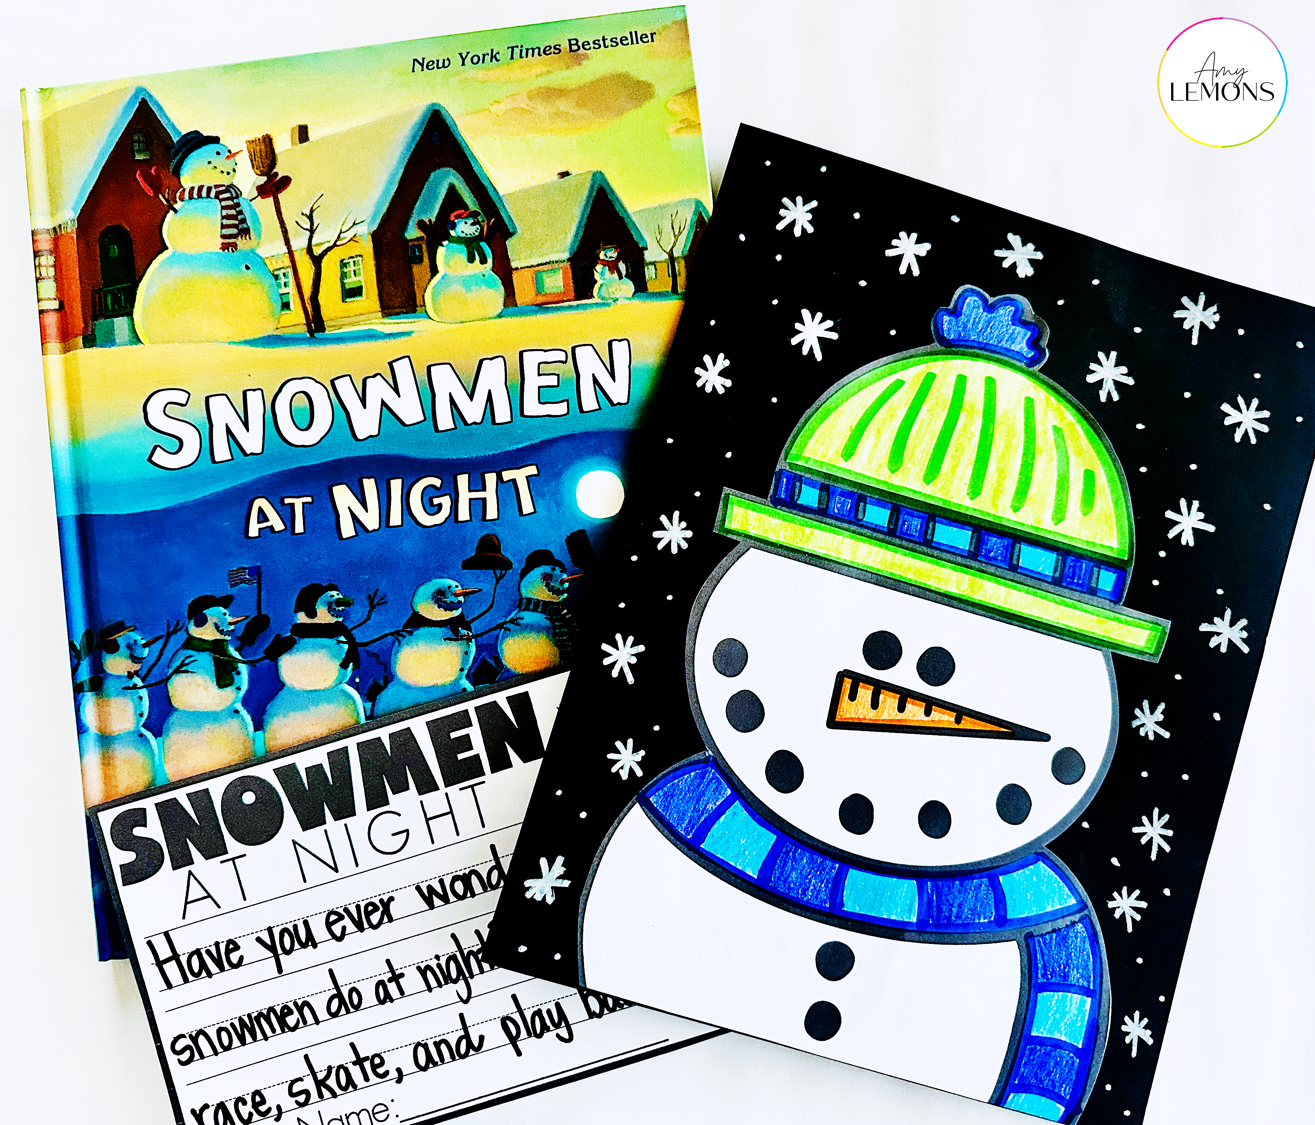 Winter reading lesson plans for the book Snowmen at Night.